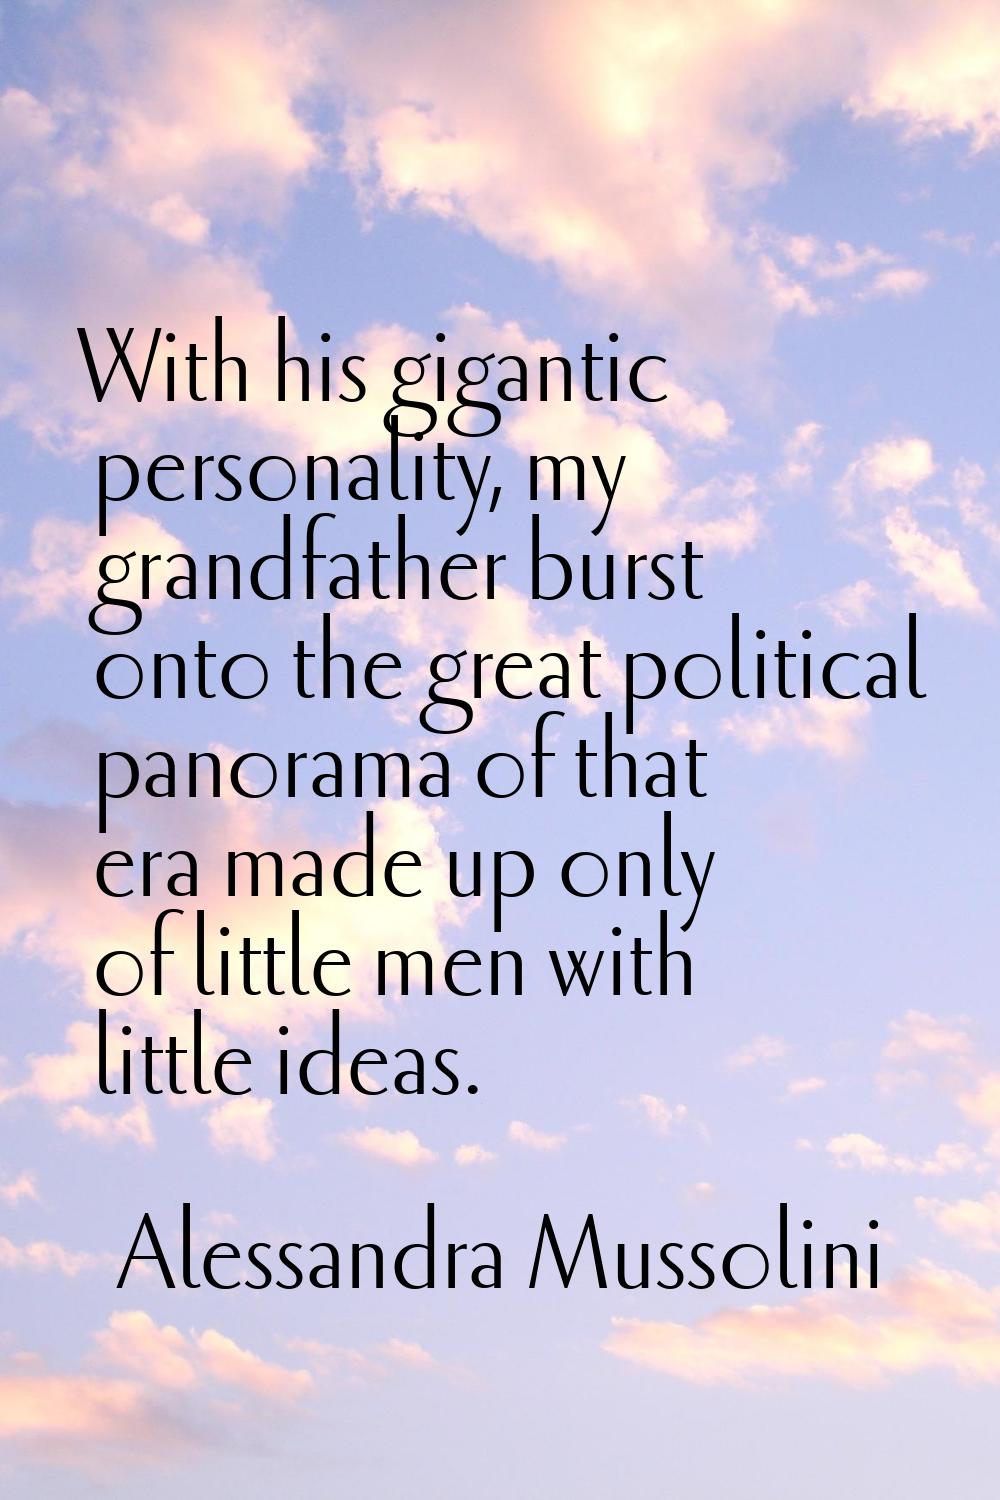 With his gigantic personality, my grandfather burst onto the great political panorama of that era m